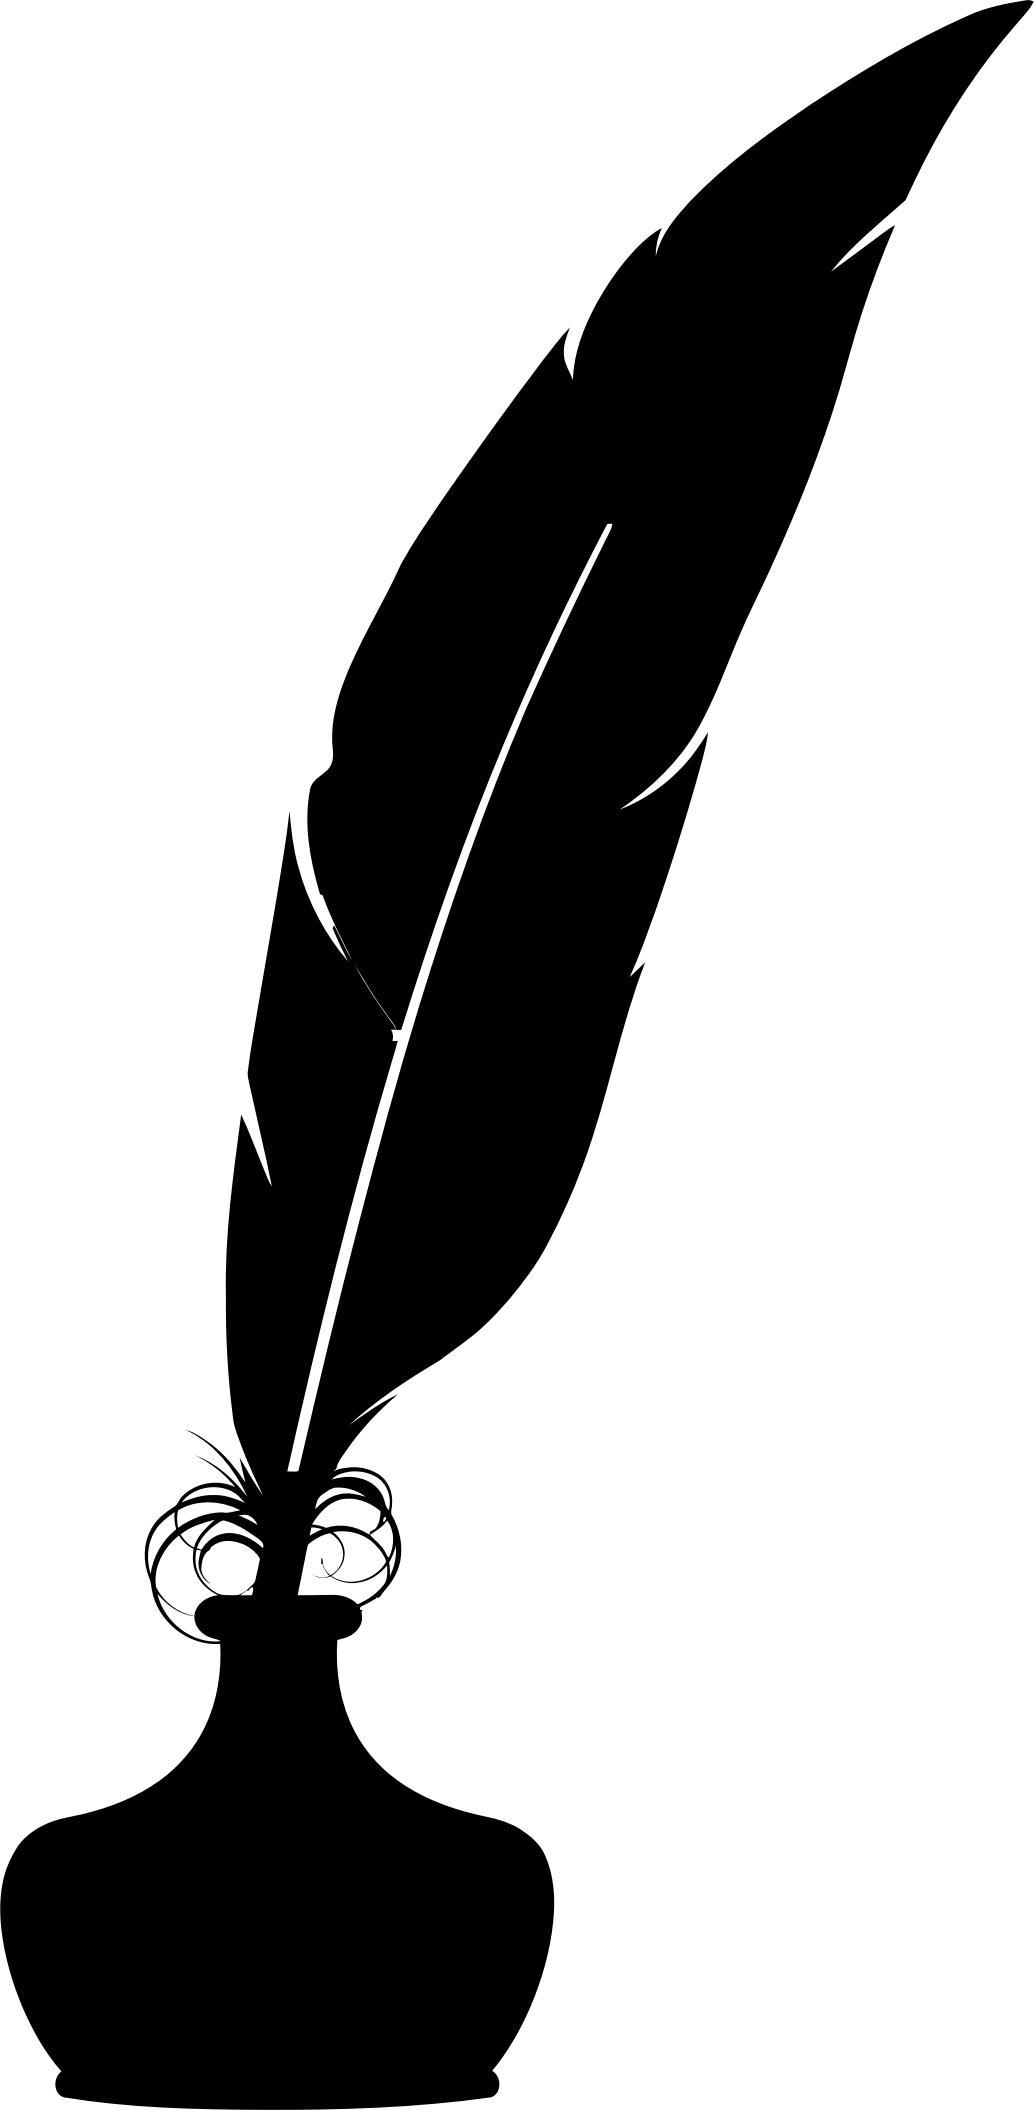 Feather Quill And Inkwell Silhouette png transparent